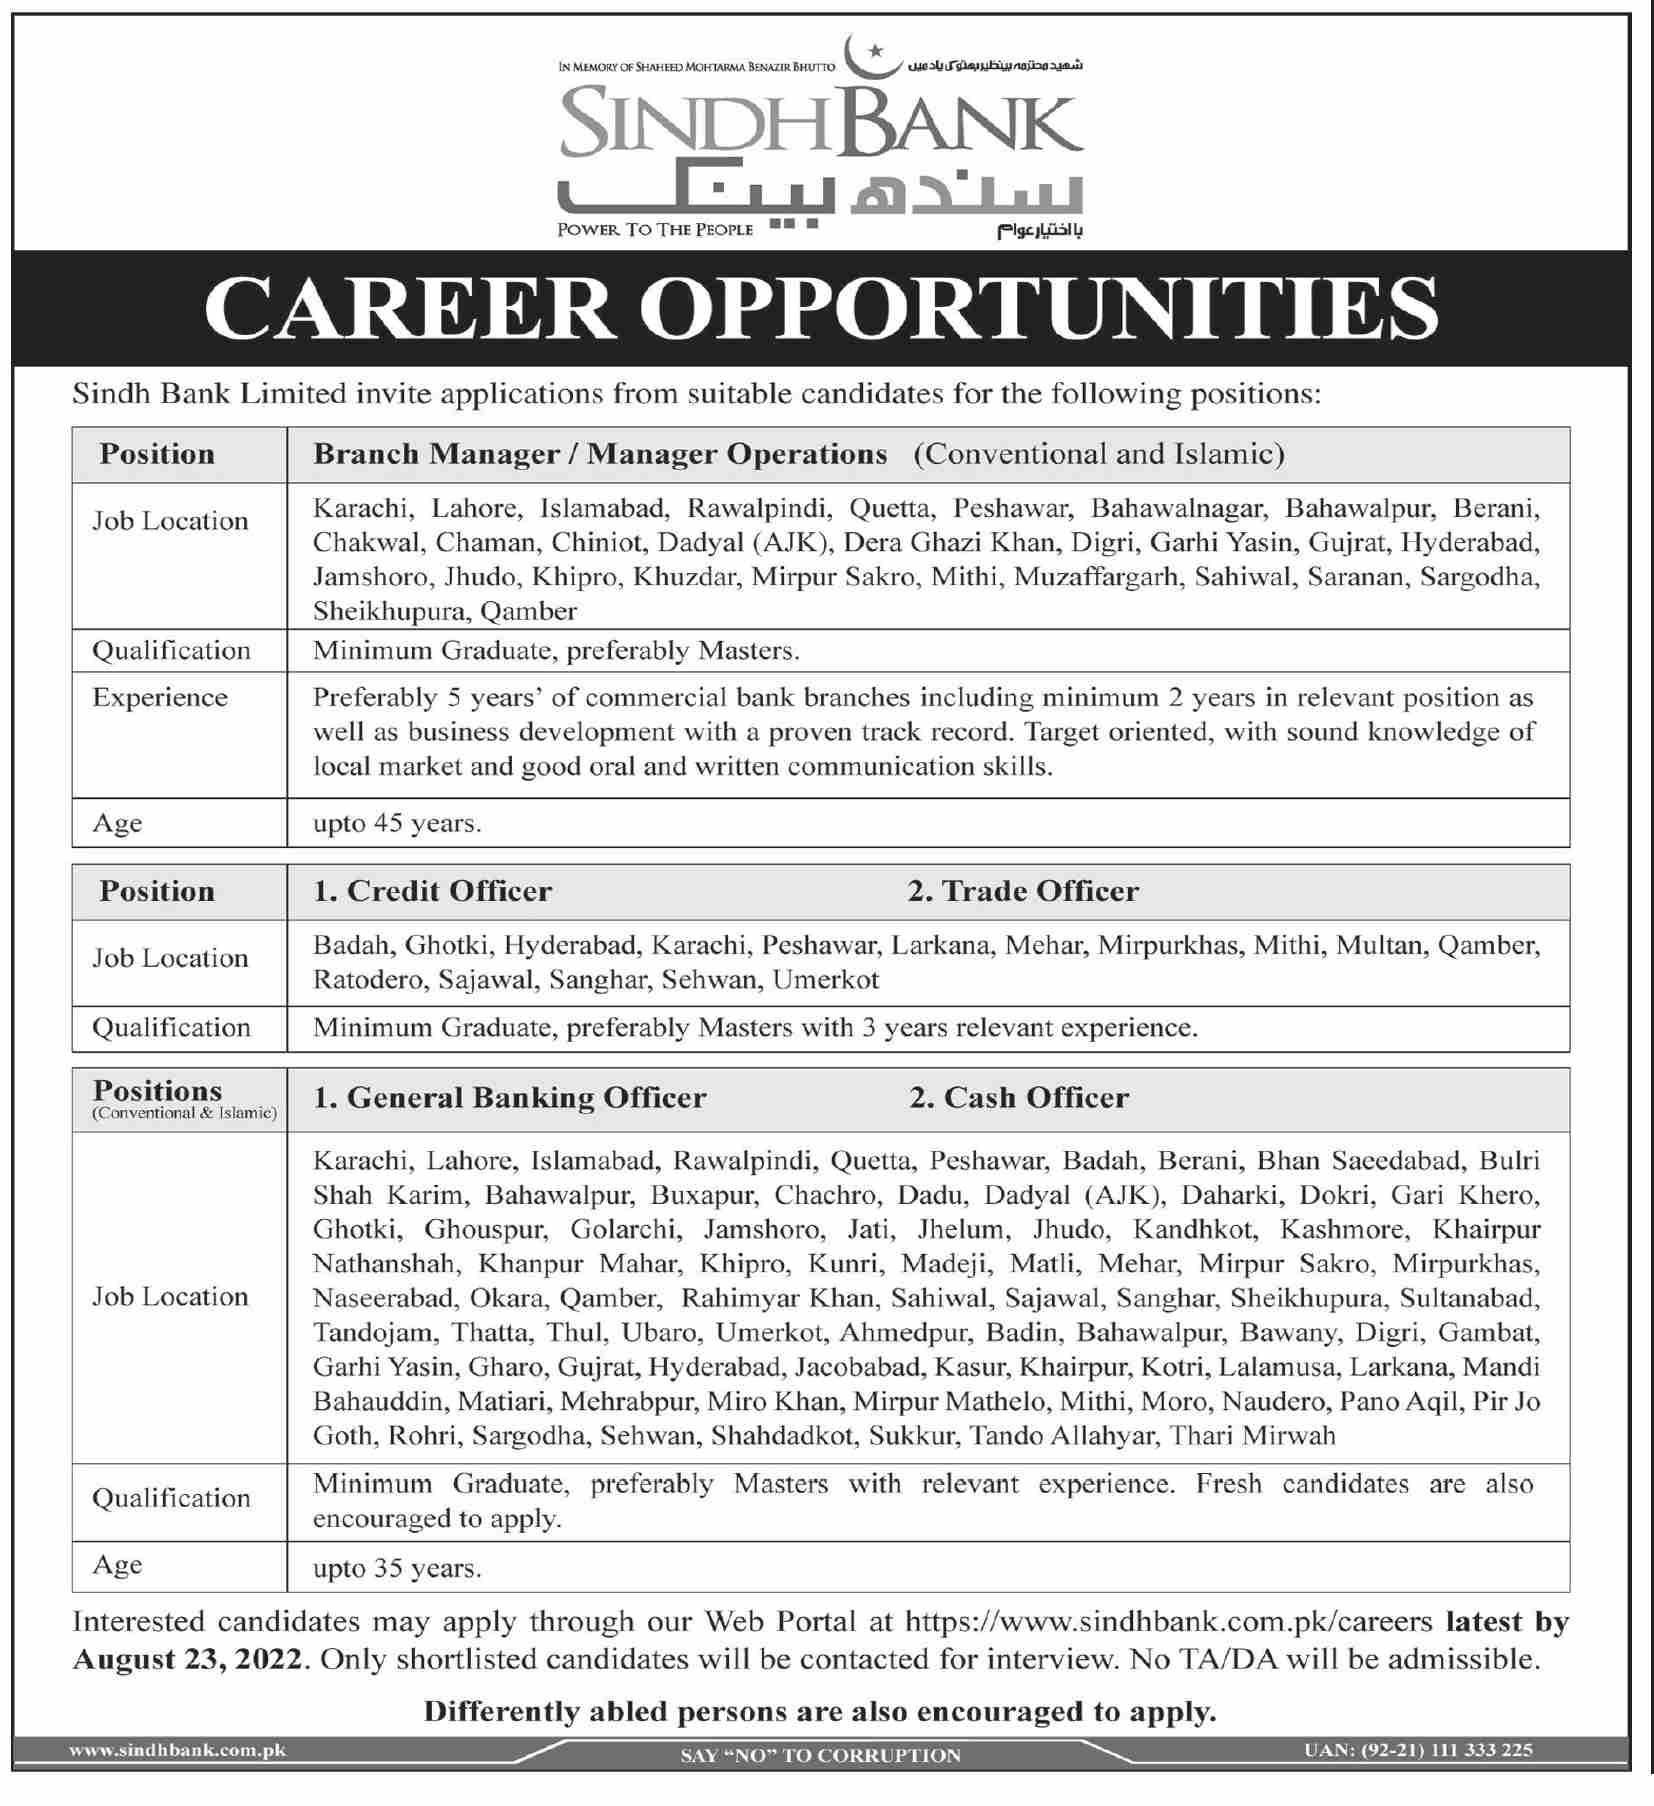 Sindh Bank Limited Jobs 2022 for General Banking Officer and Cash Officer